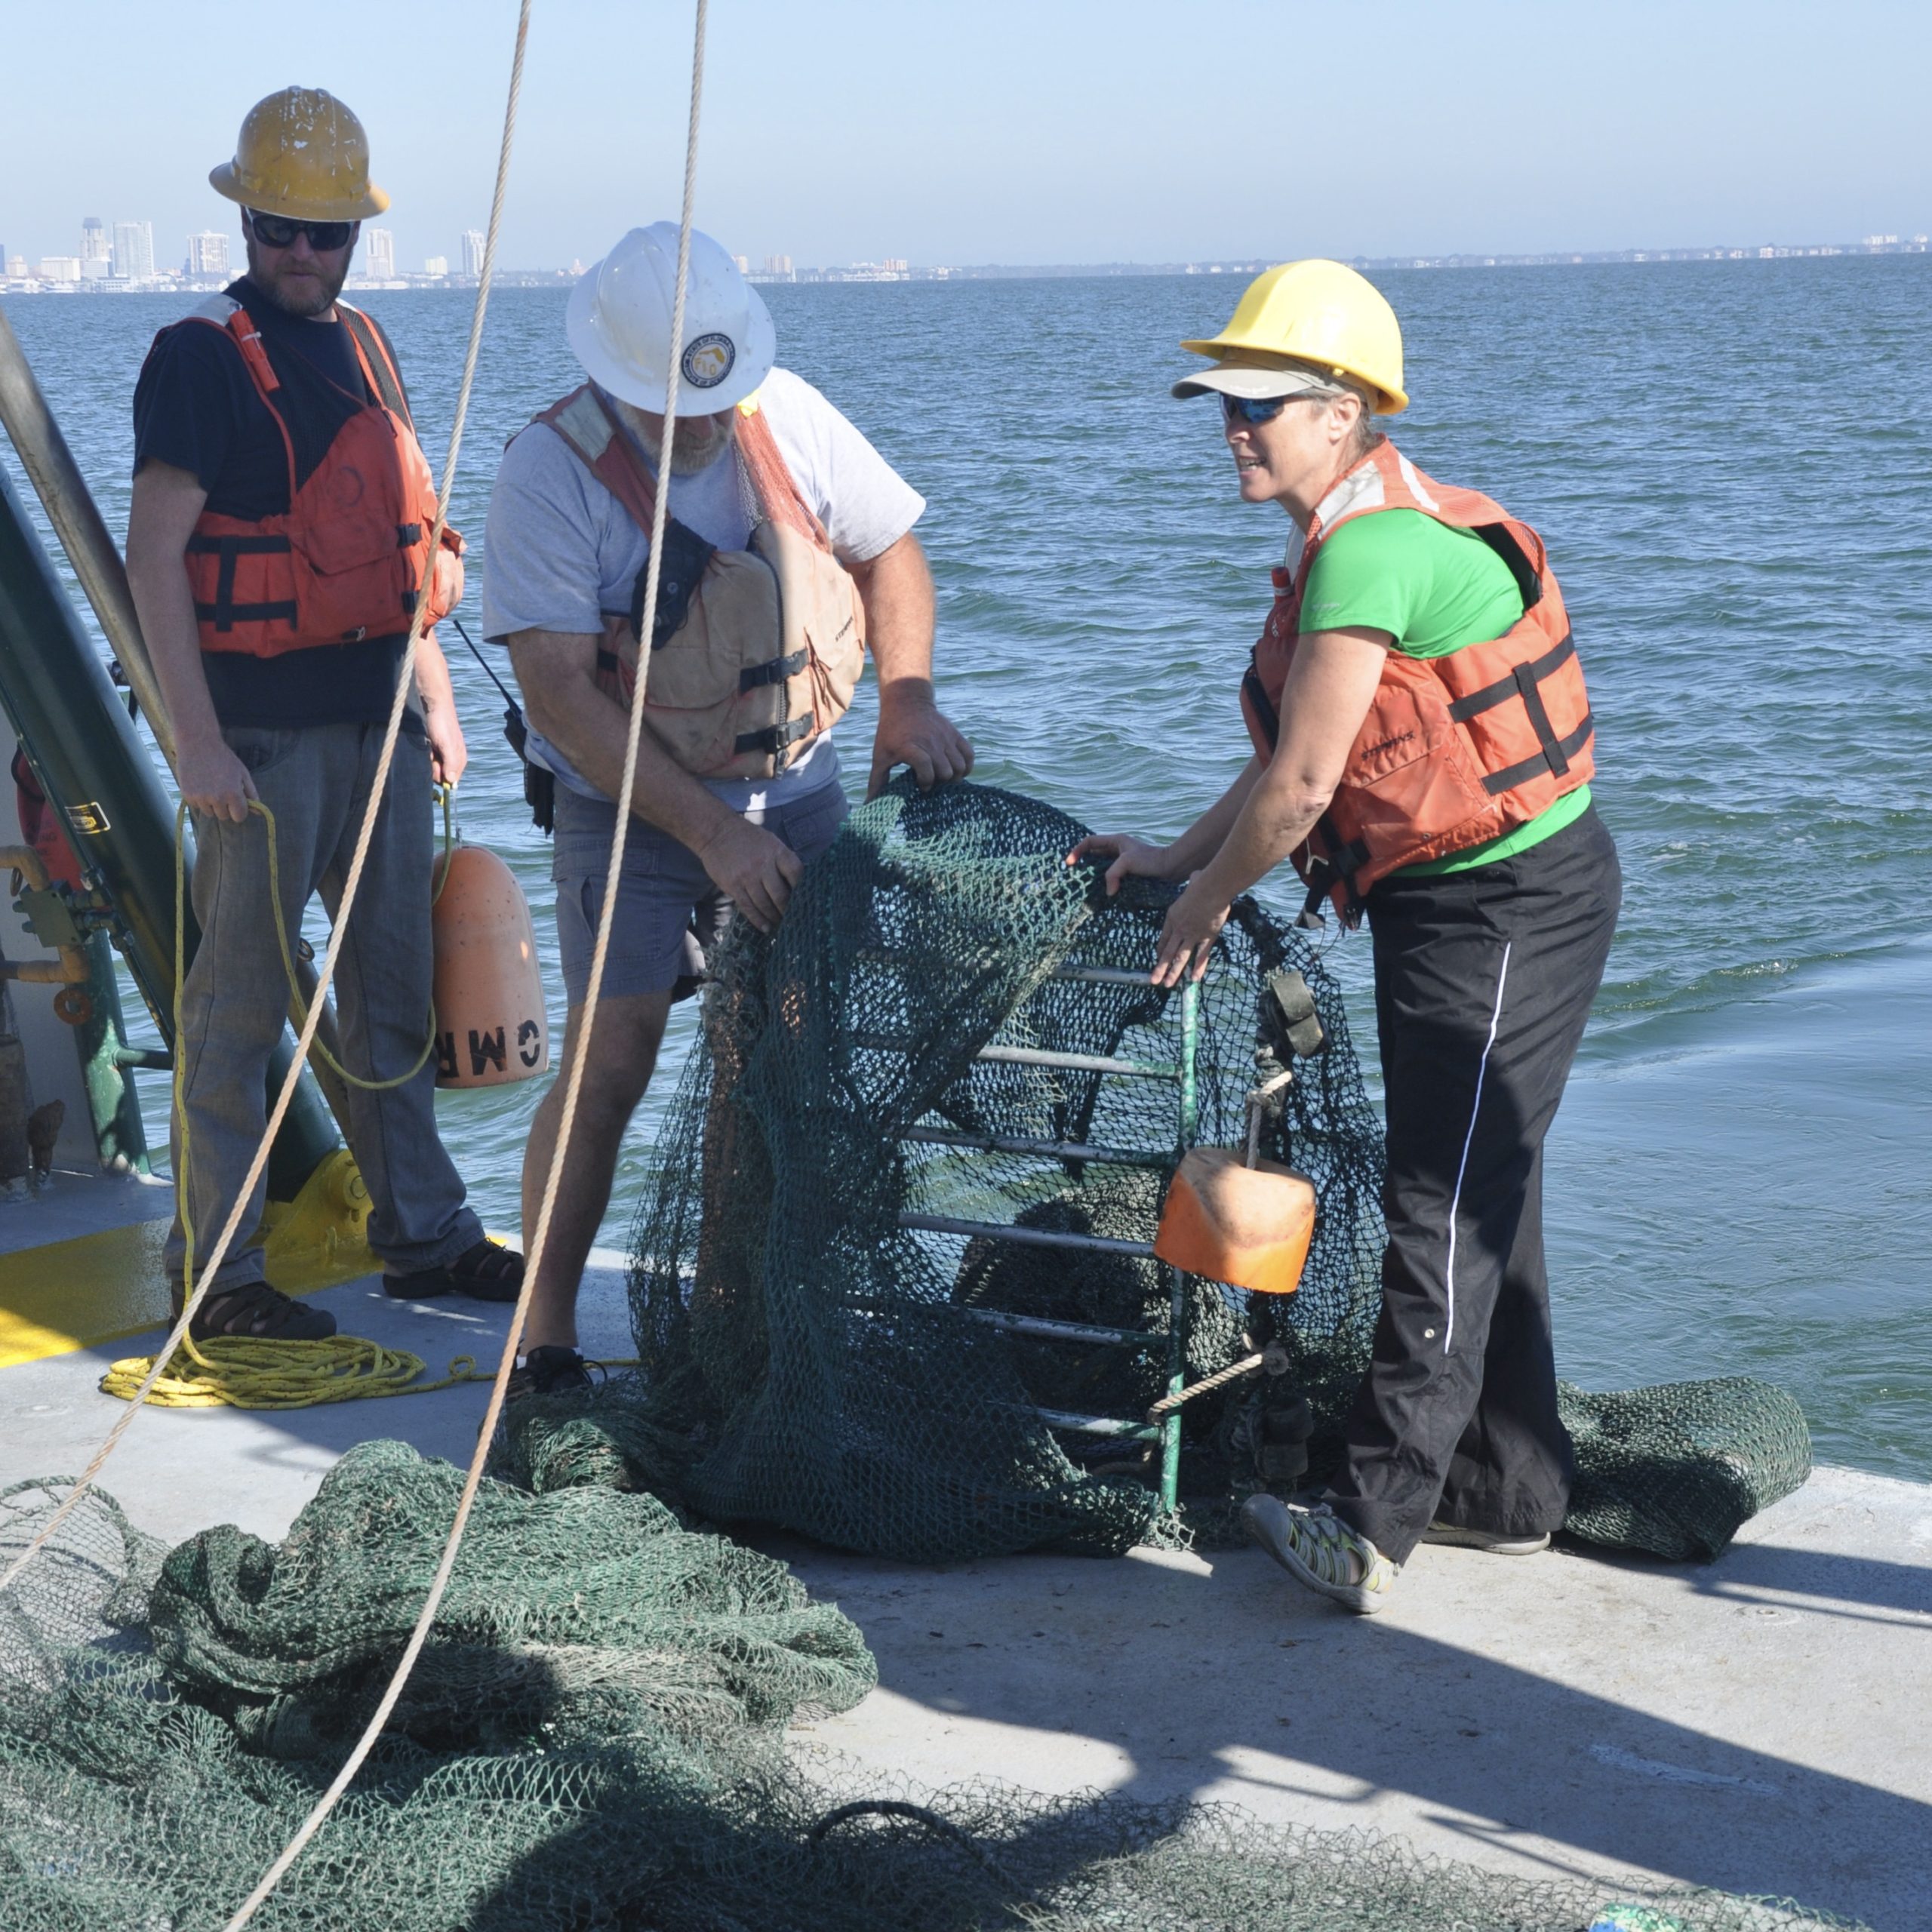 Deploying a fishing trawl aboard the R/V Weatherbird II while teaching from sea during an experiential learning in marine science field course for teachers.